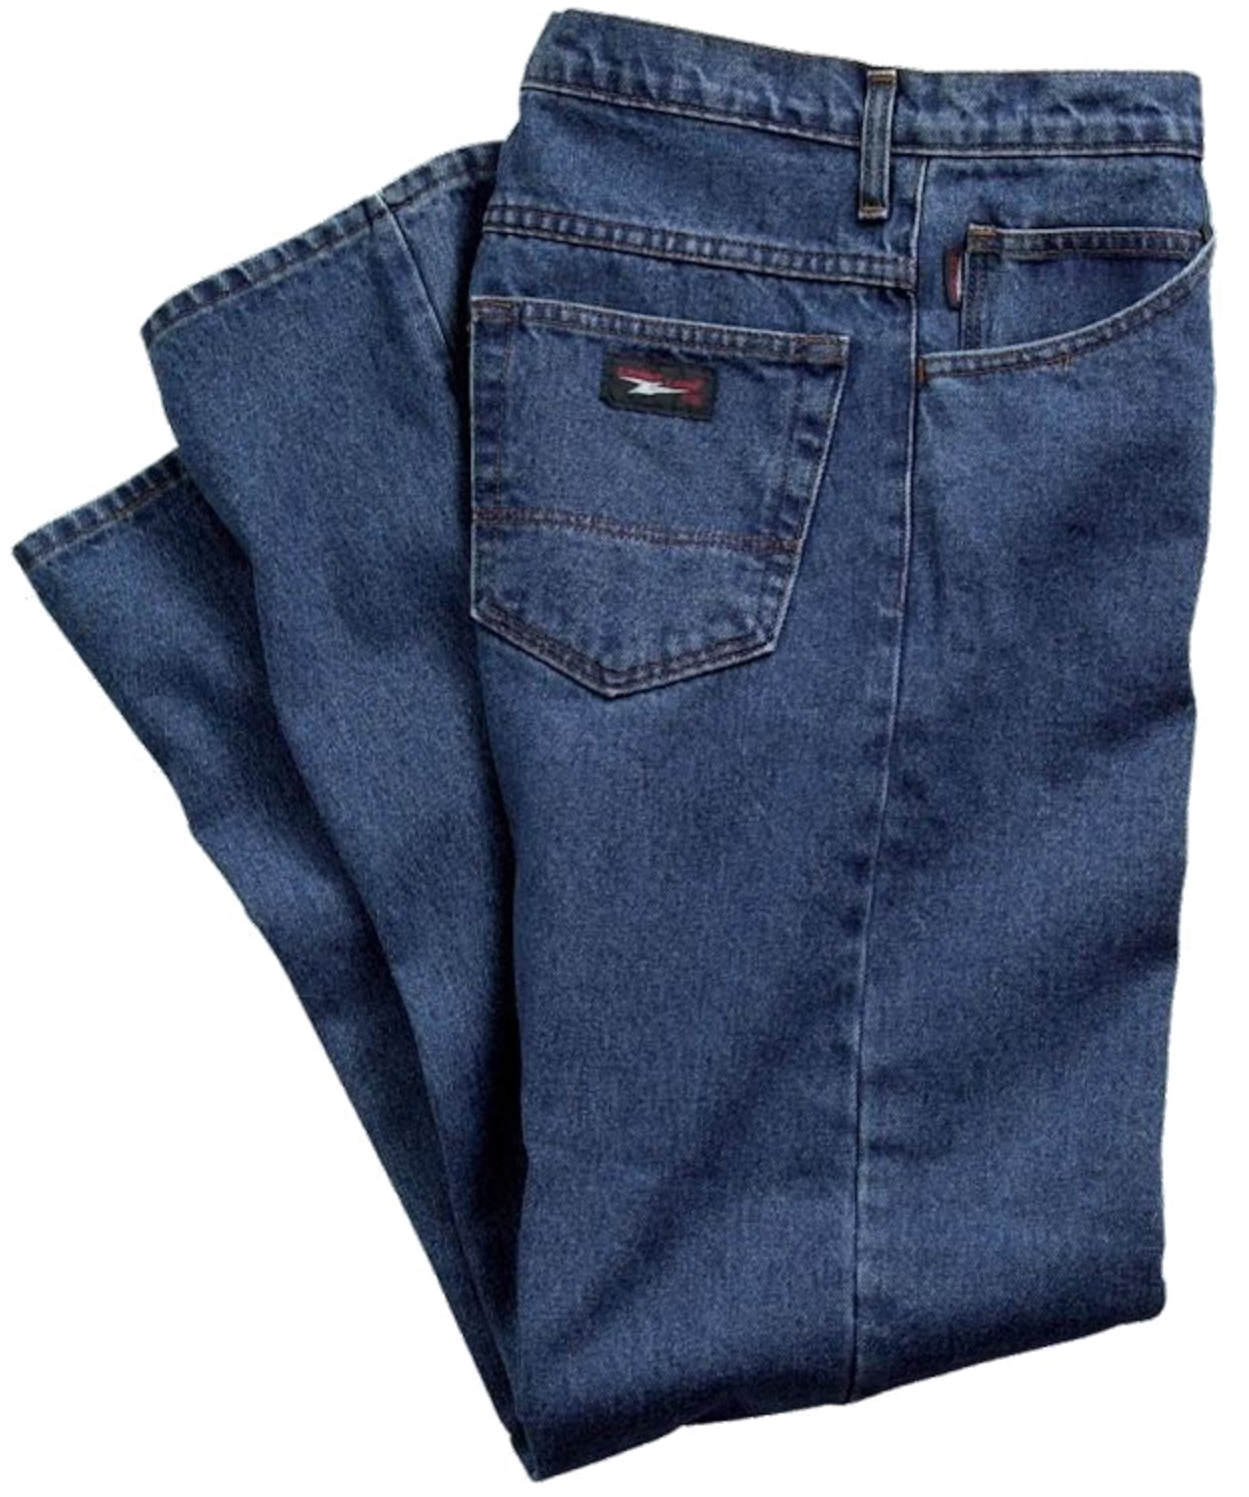 Jeans PNG Isolated Transparent Image